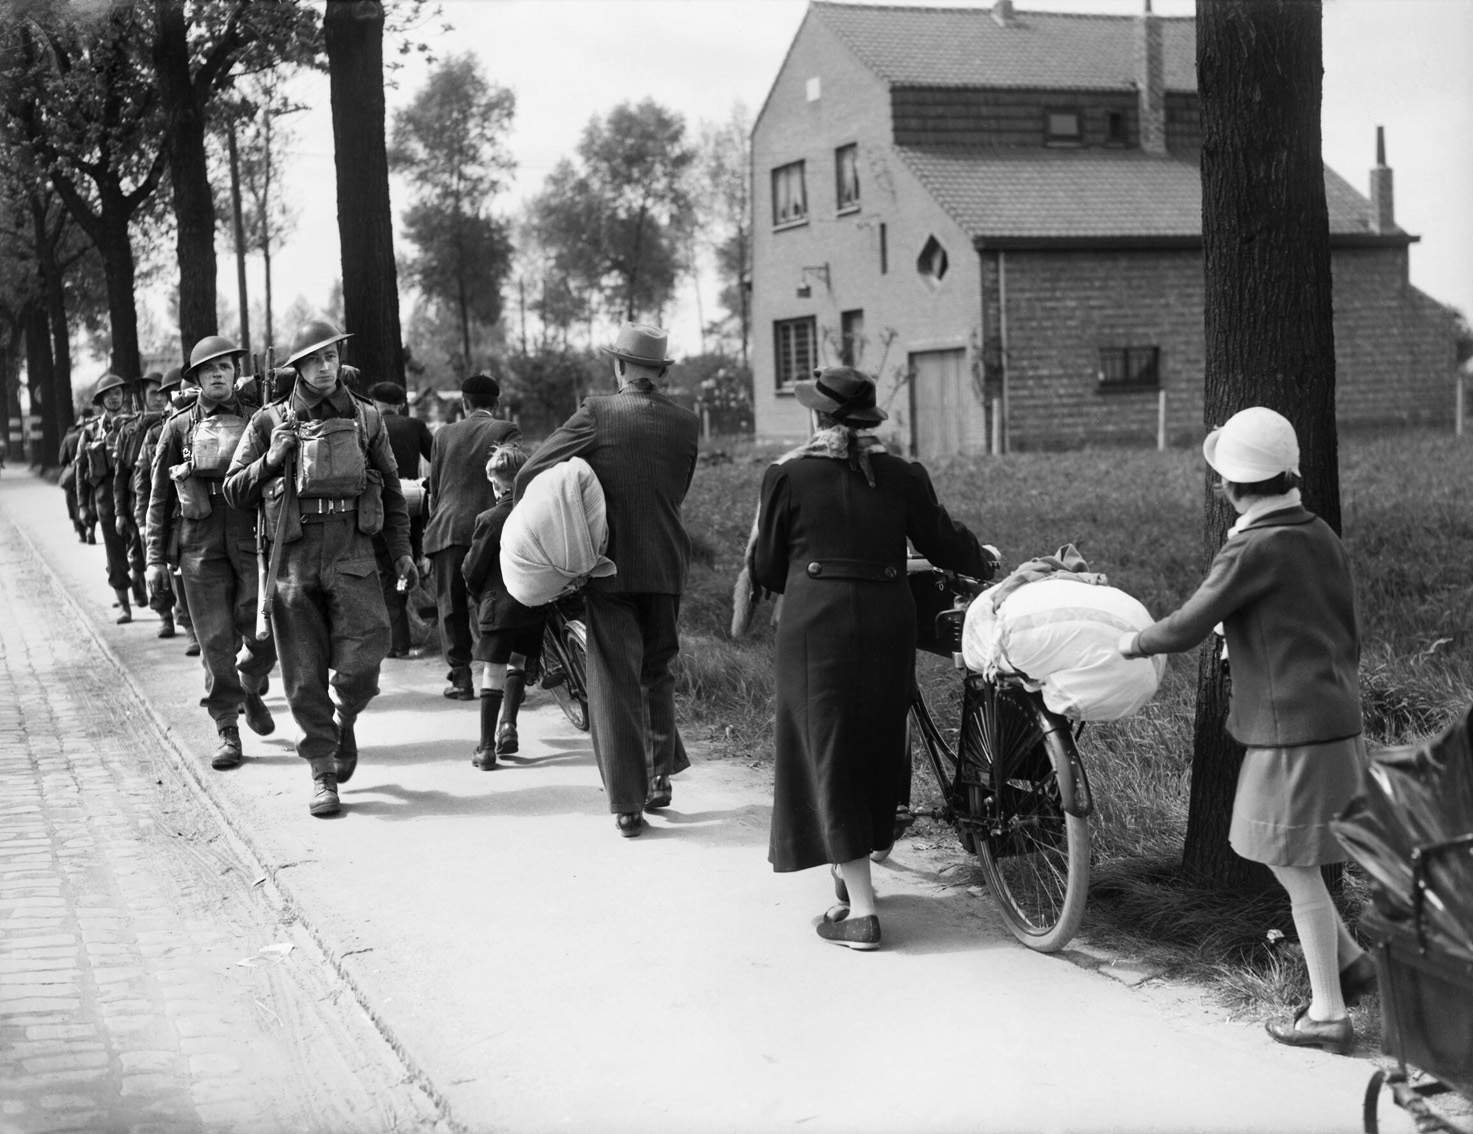 British troops march toward the front on May 12, 1940, two days after the German onslaught began as Belgian refugees stream away from the advancing Germans. Within days the British would also be in retreat before the swift enemy offensive.